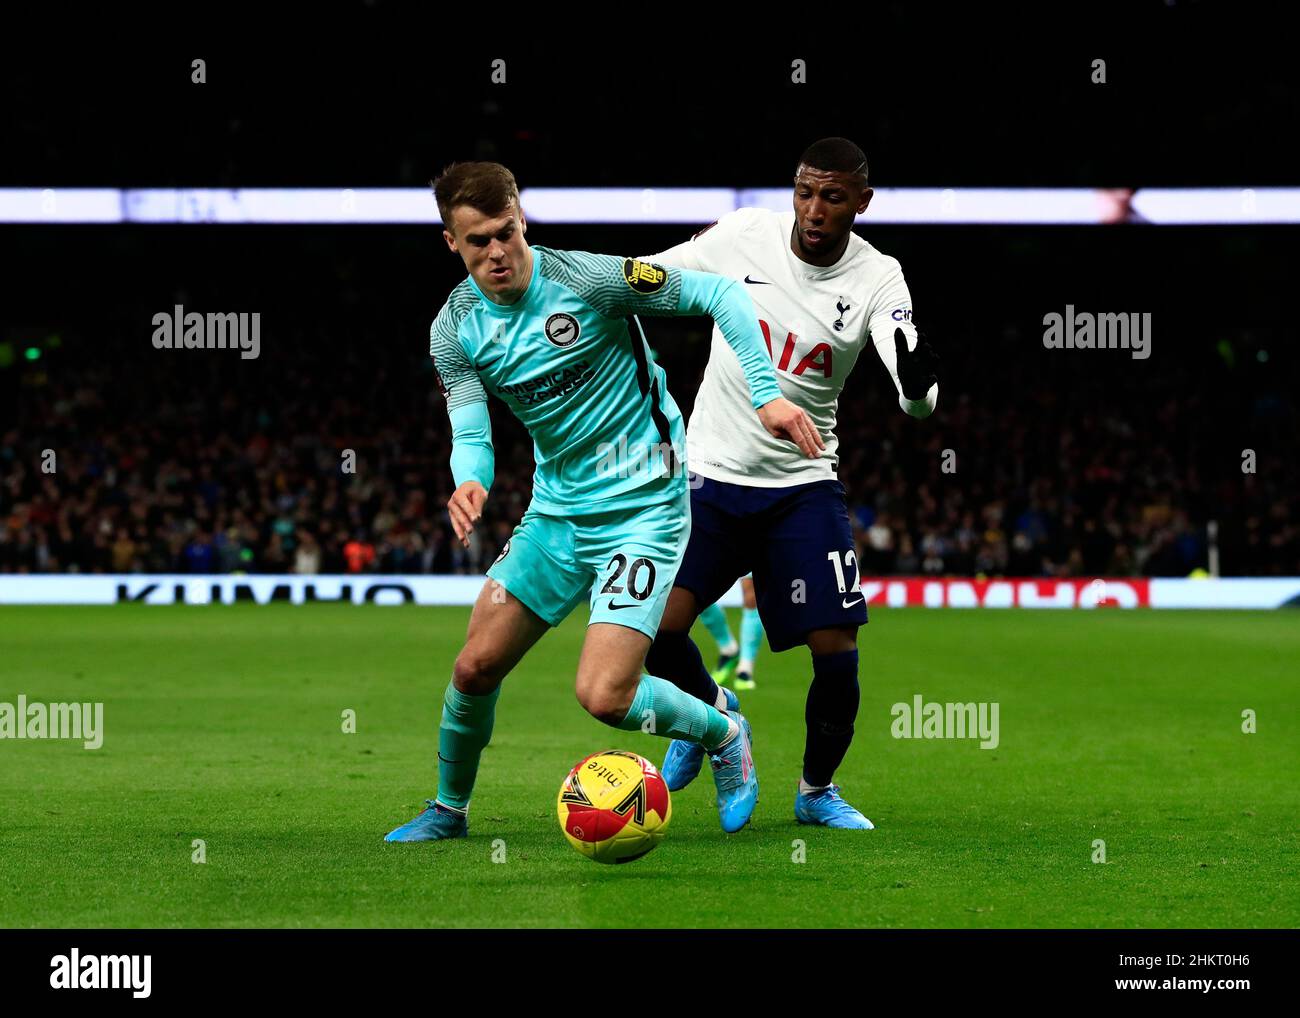 5th February 2022 : Tottenham Hotspur Stadium, Tottenham, London, England; FA Cup football, Tottenham versus Brighton and Hove Albion: Solly March of Brighton &amp; Hove Albion challenged by Emerson Royal of Tottenham Hotspur Stock Photo